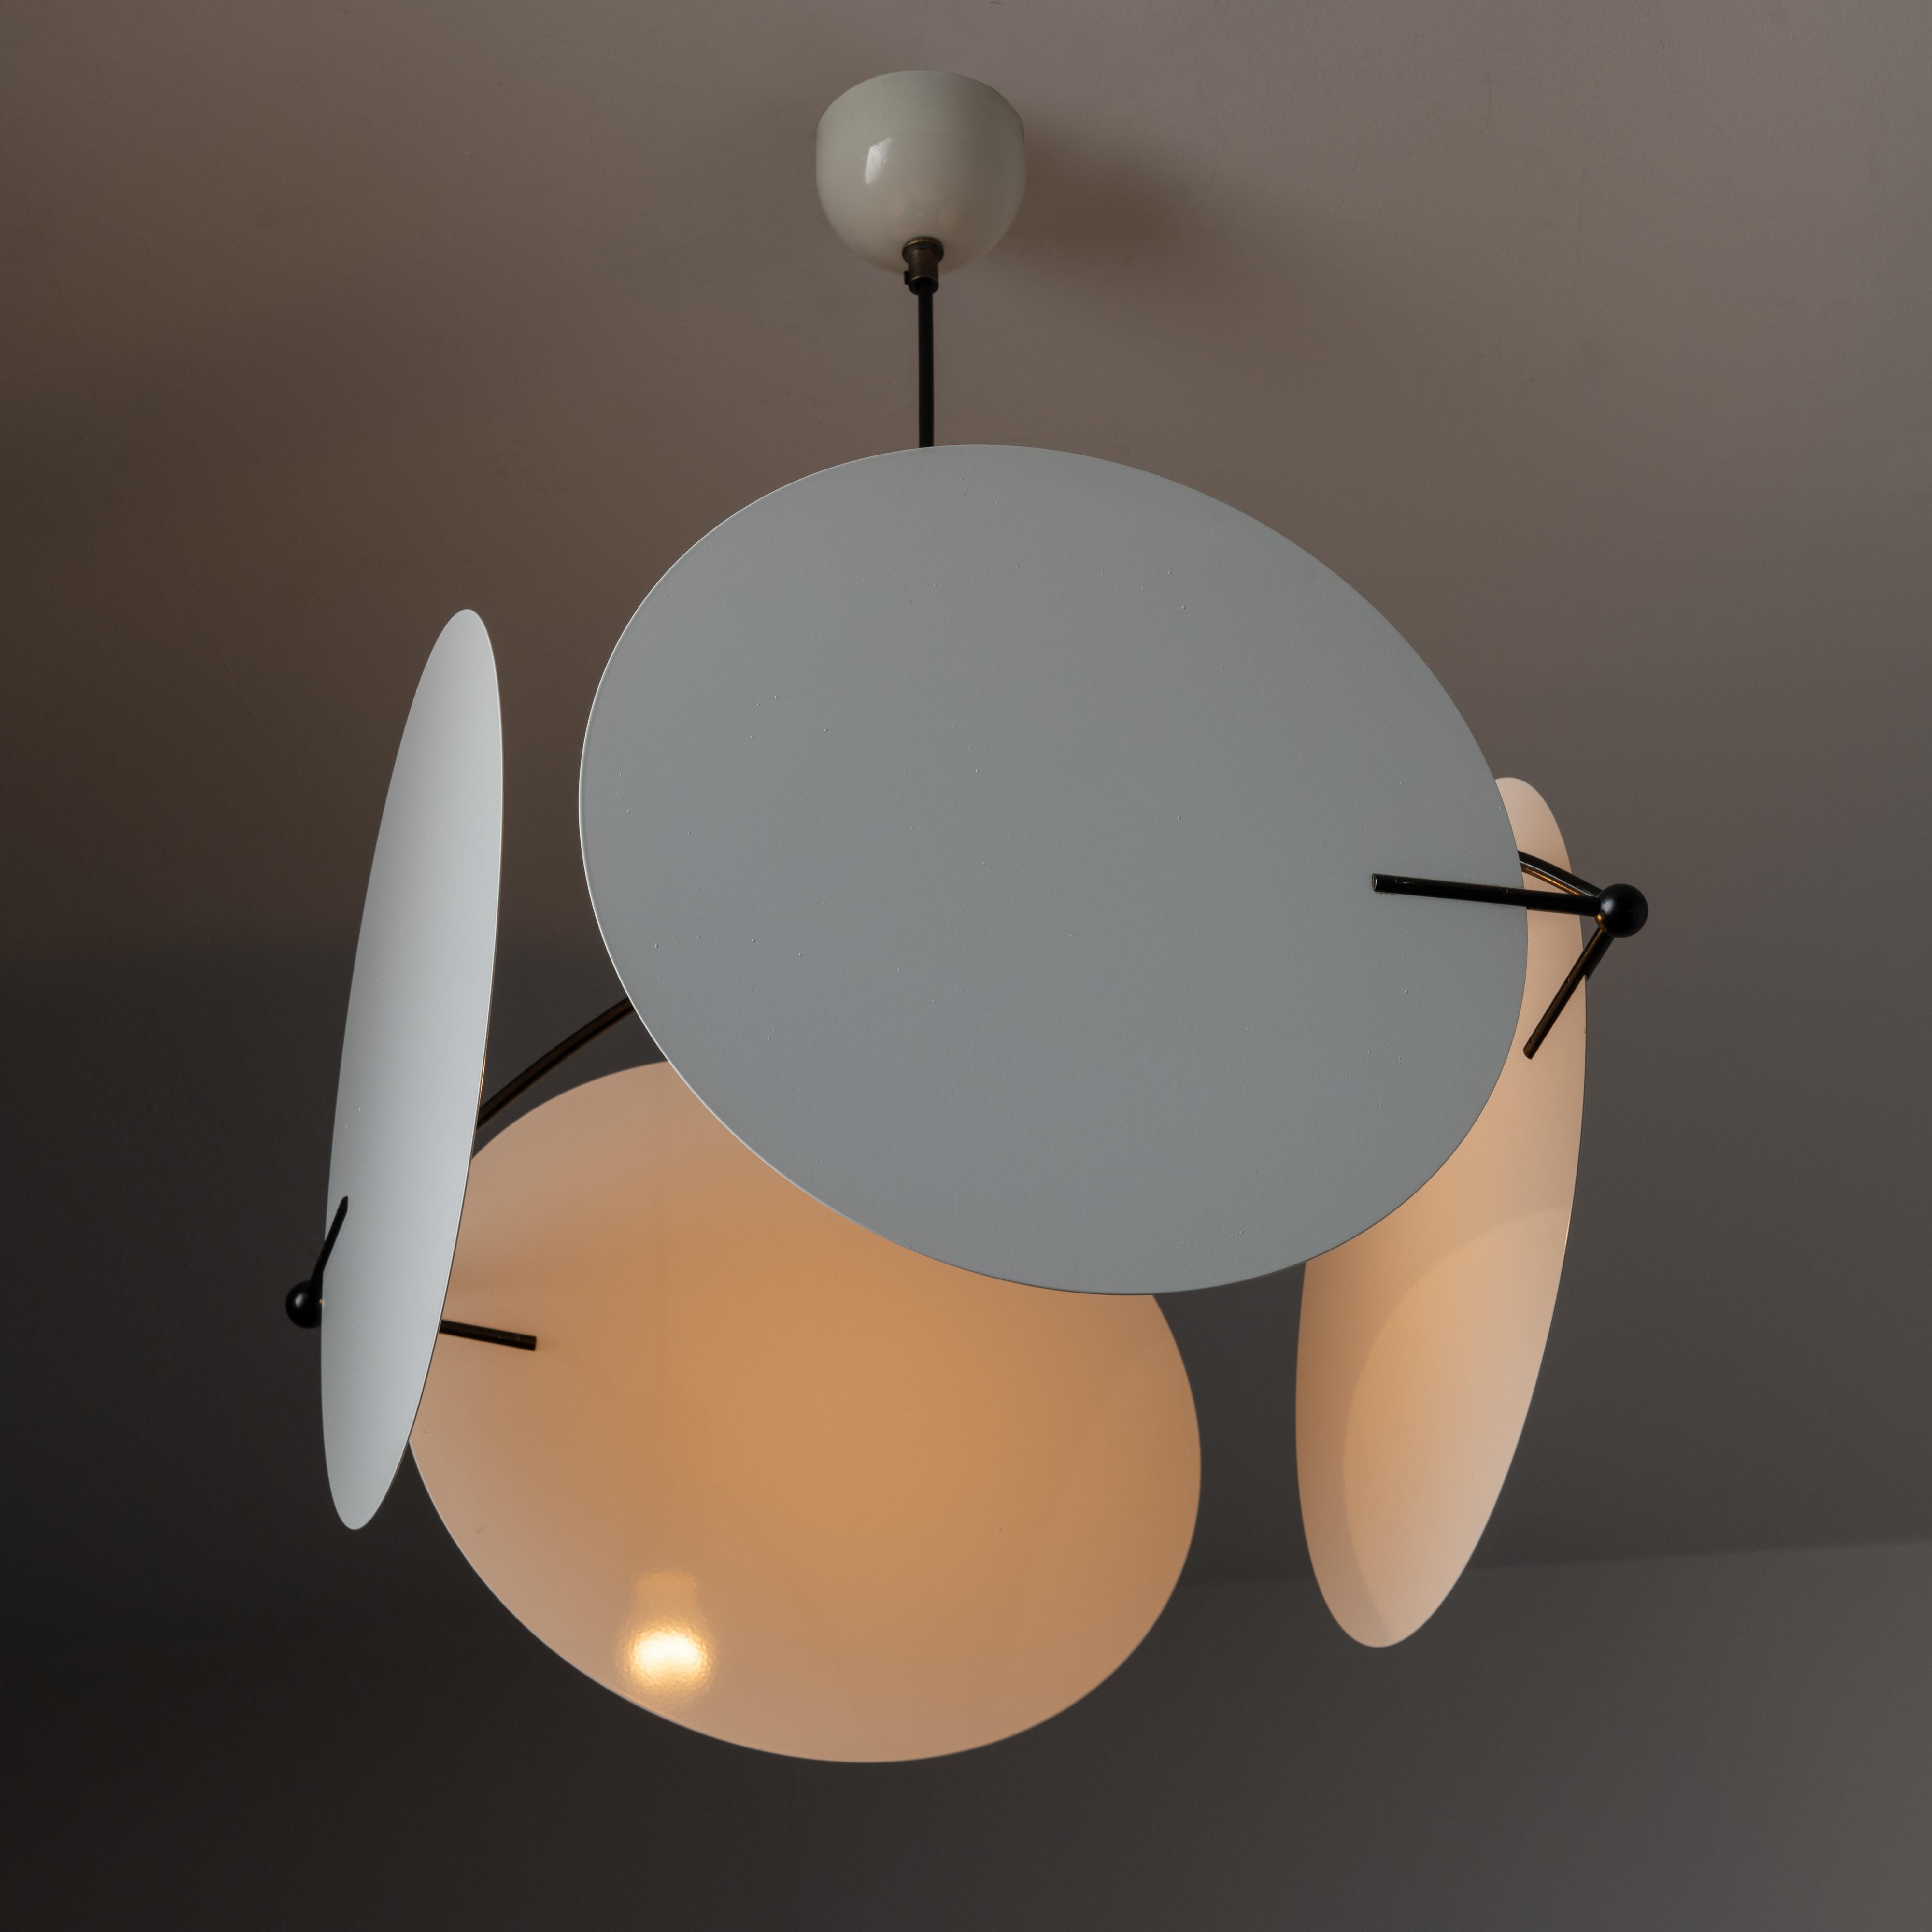 Late 20th Century Model 460 'Monet' Ceiling Light by Vico Magistretti for Oluce